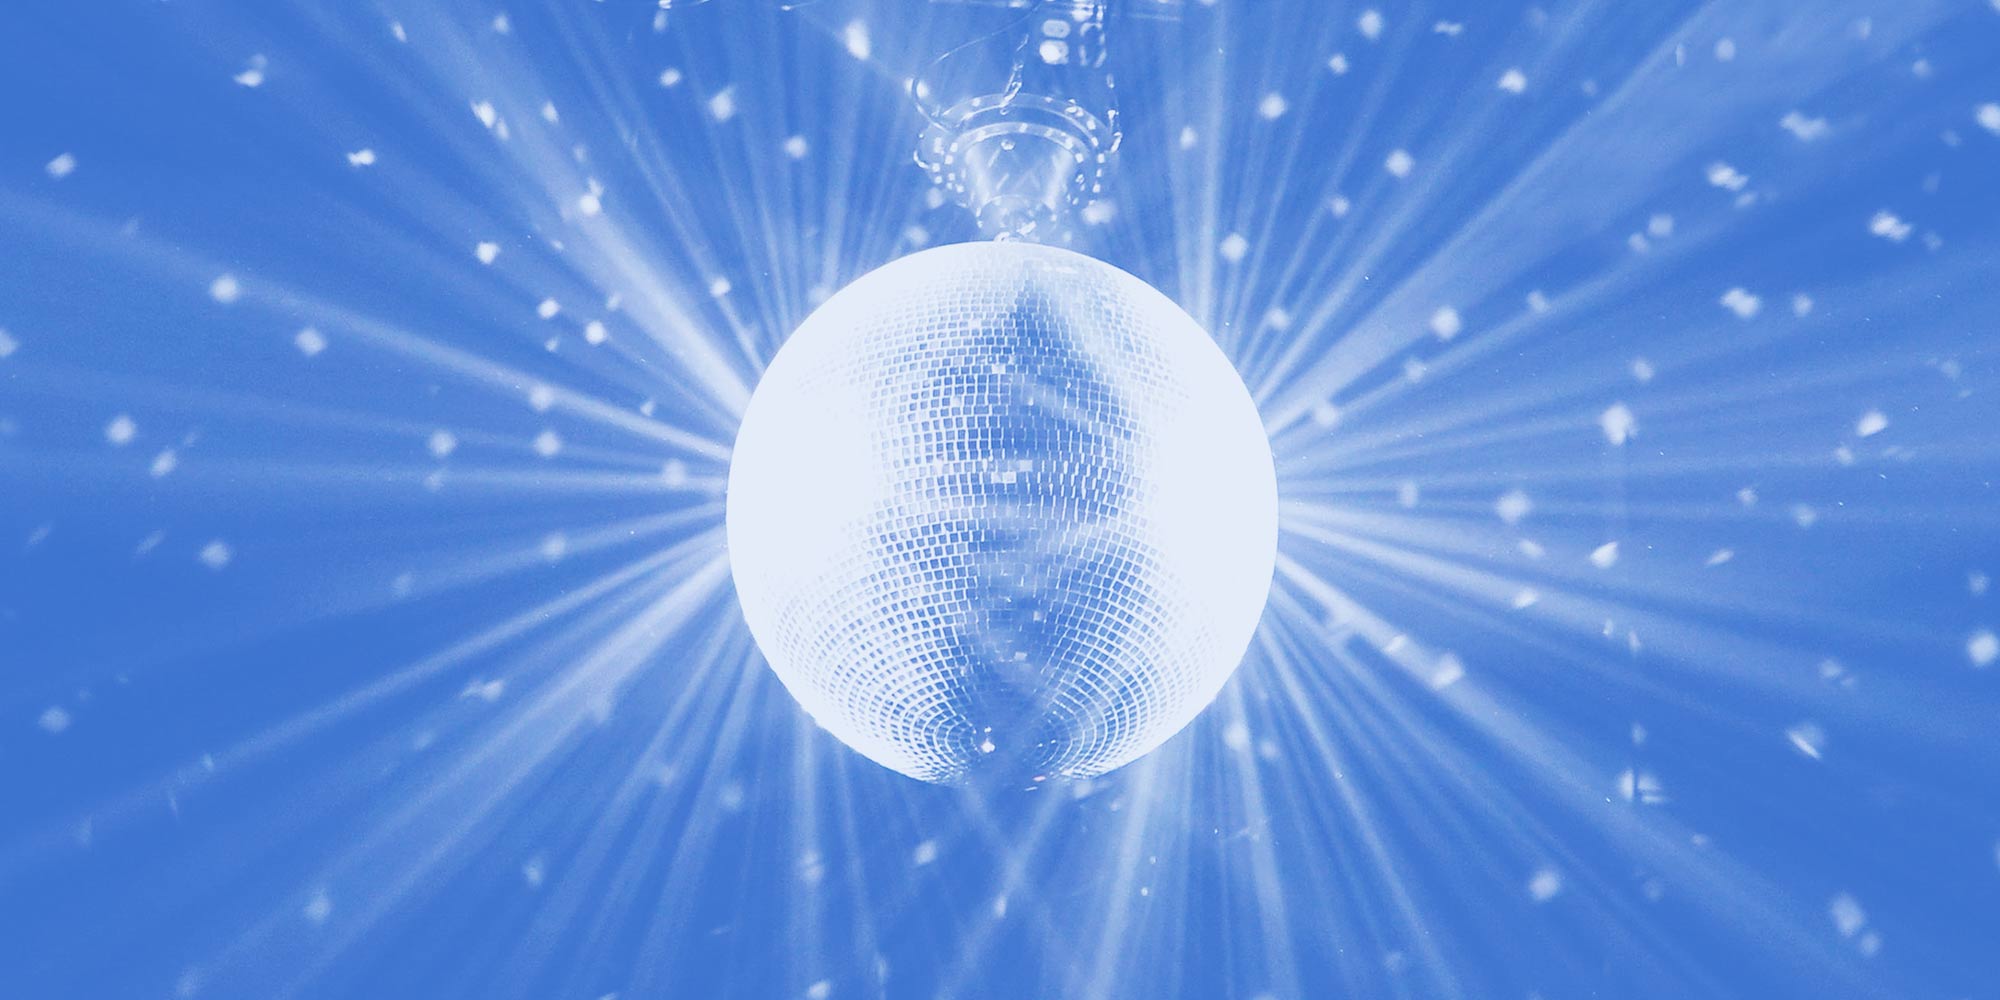 Plan for the New Year. Disco ball